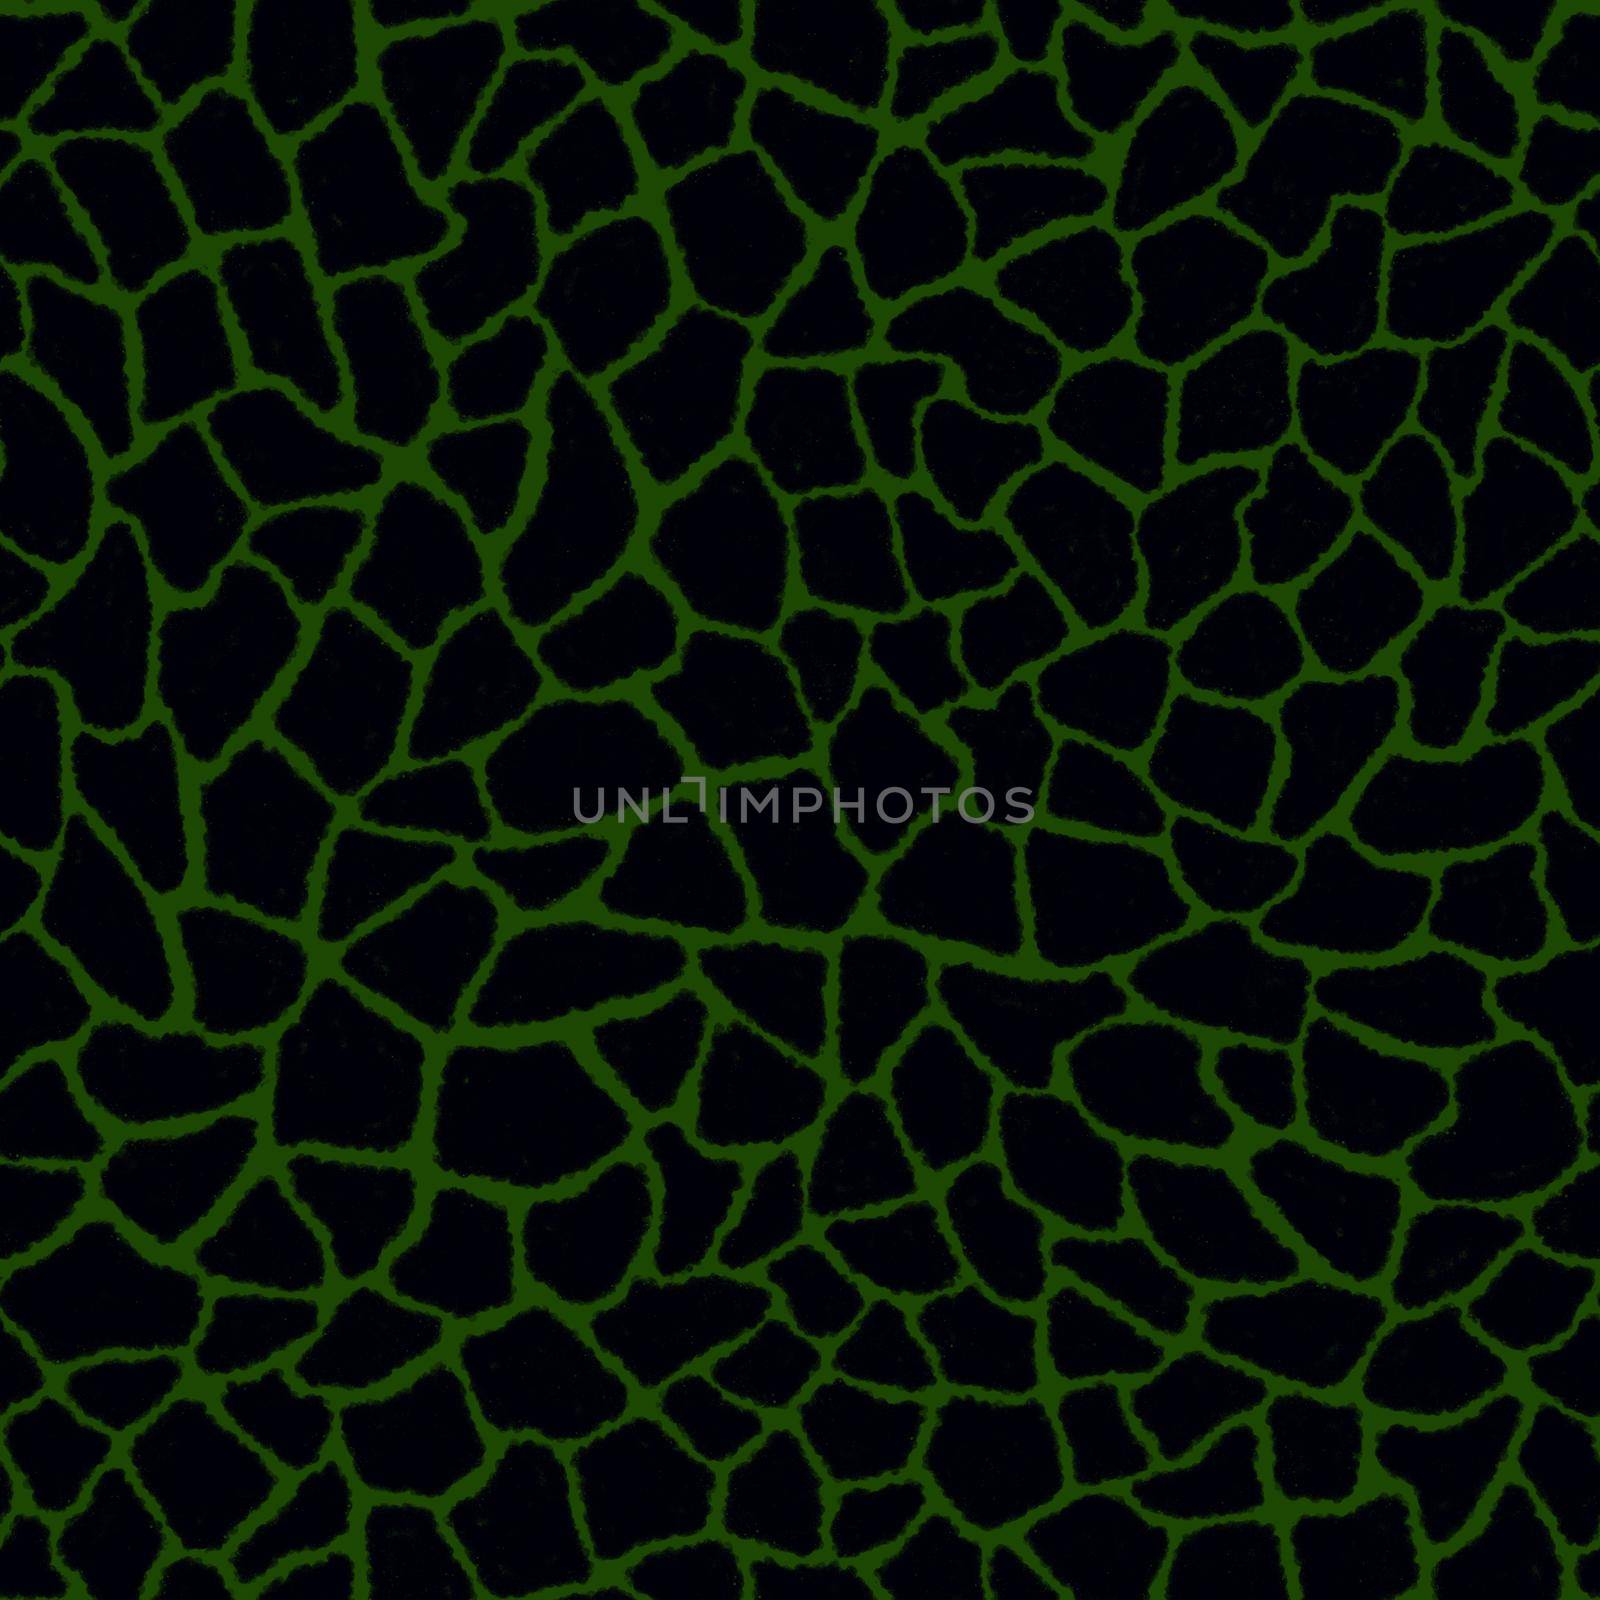 Giraffe skin color seamless pattern with fashion animal print for continuous replicate. Chaotic mosaic black pieces on green background. Wrapping paper, funny textile fabric print,design,decor.